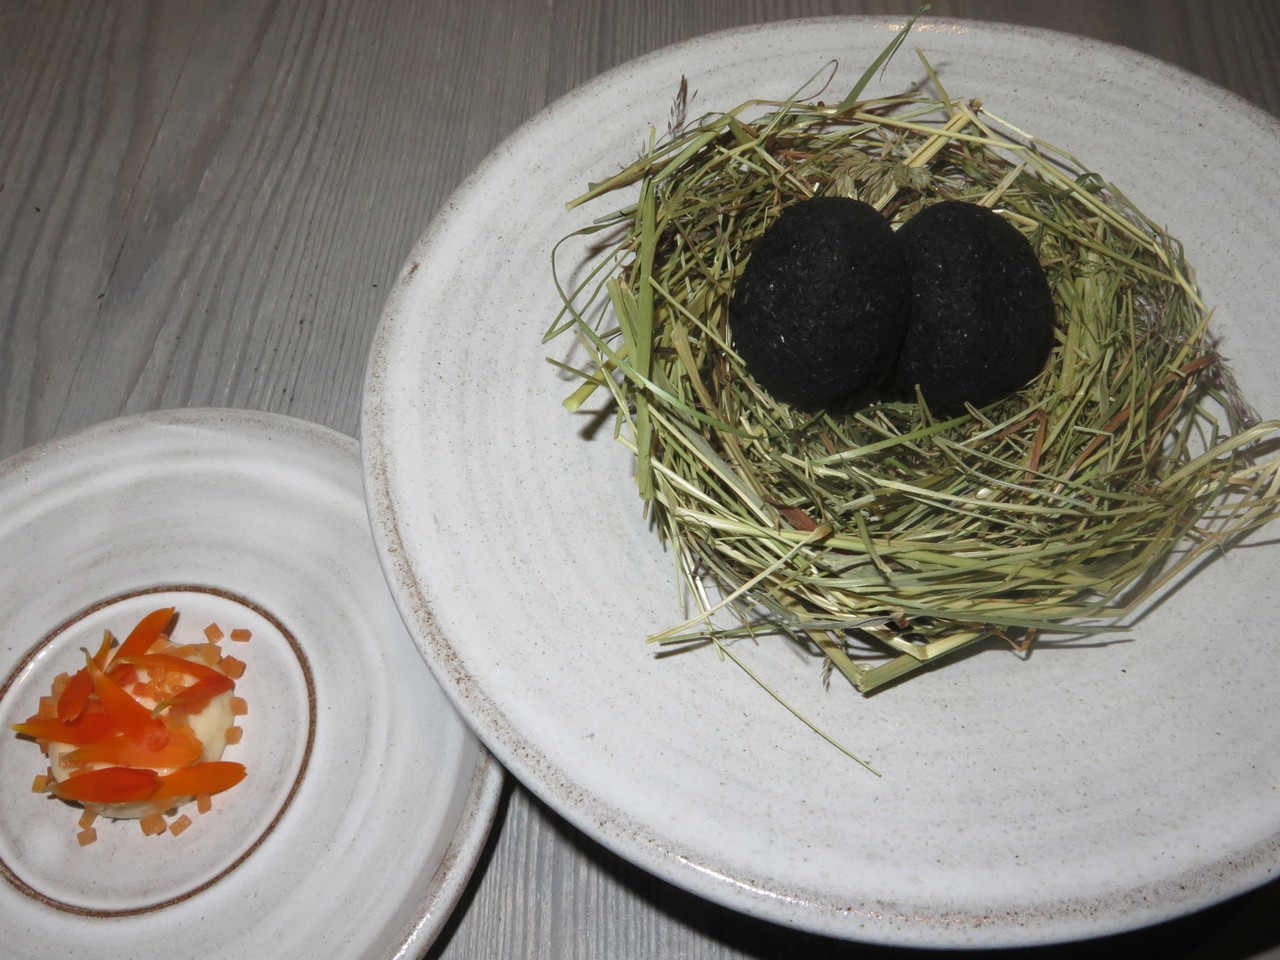 A small egg coated in ash, sauce made from dried trout and pickled marigold